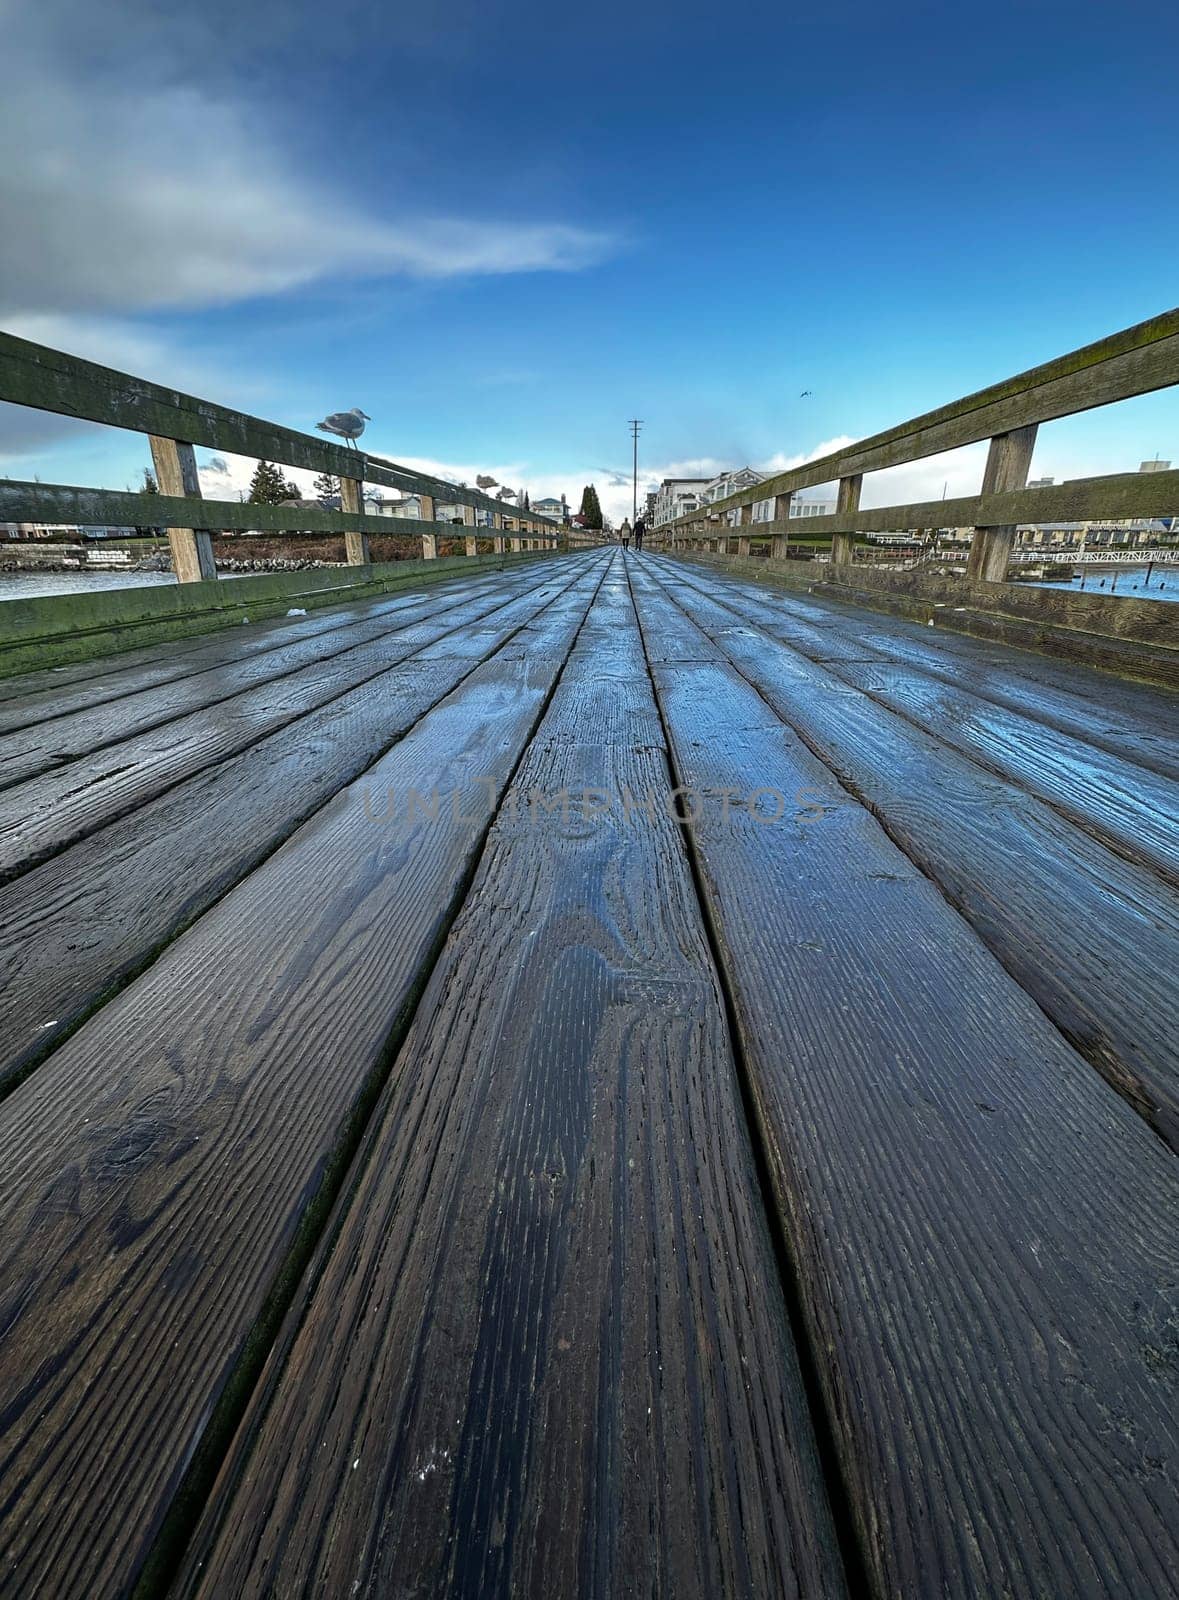 Wooden boardwalk or pier for walking along the shoreline of Sidney, British Columbia, Canada